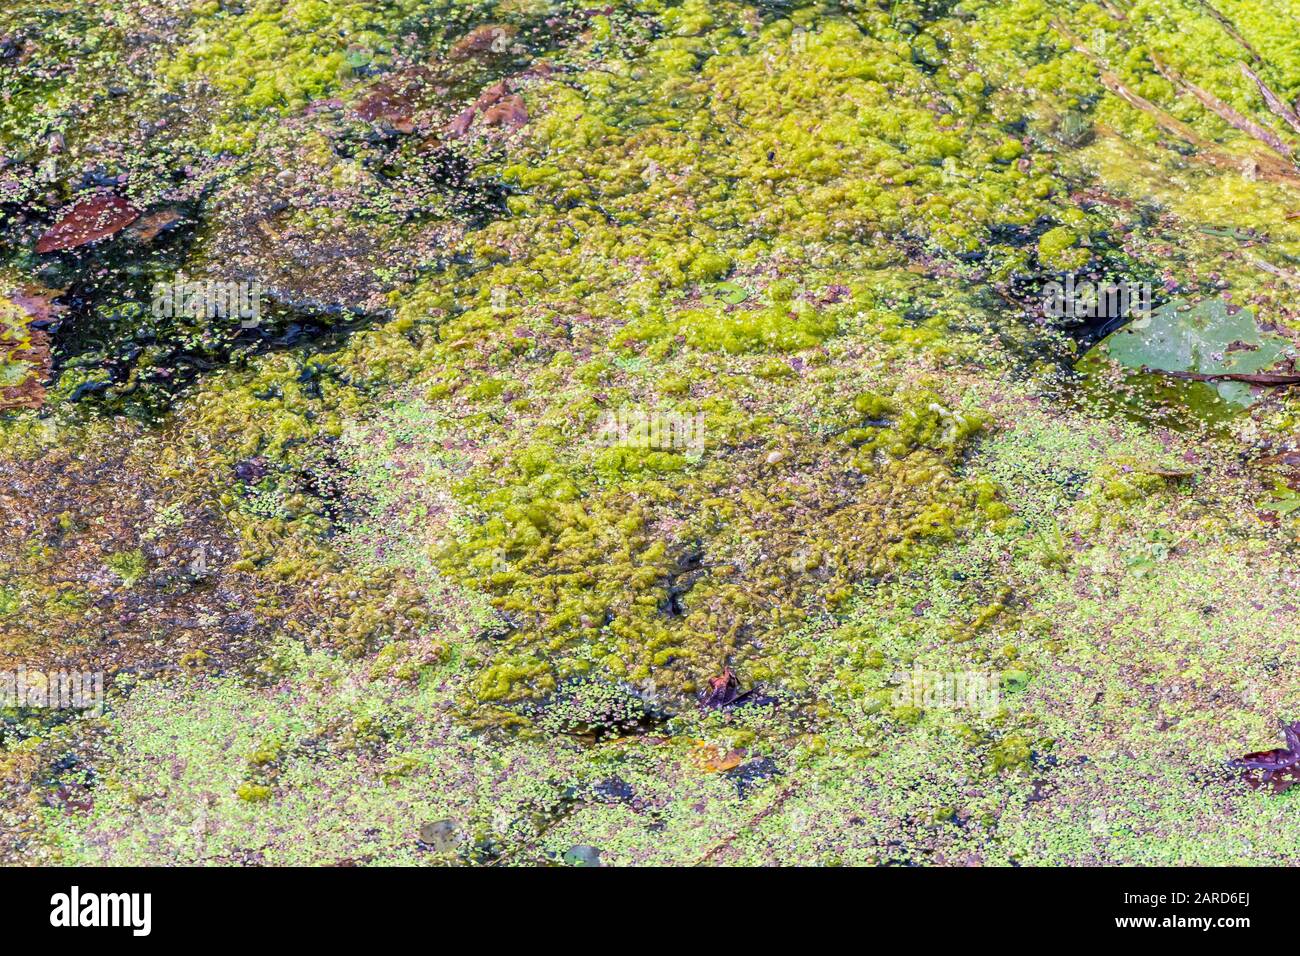 Duckweed plants on the water surface Stock Photo